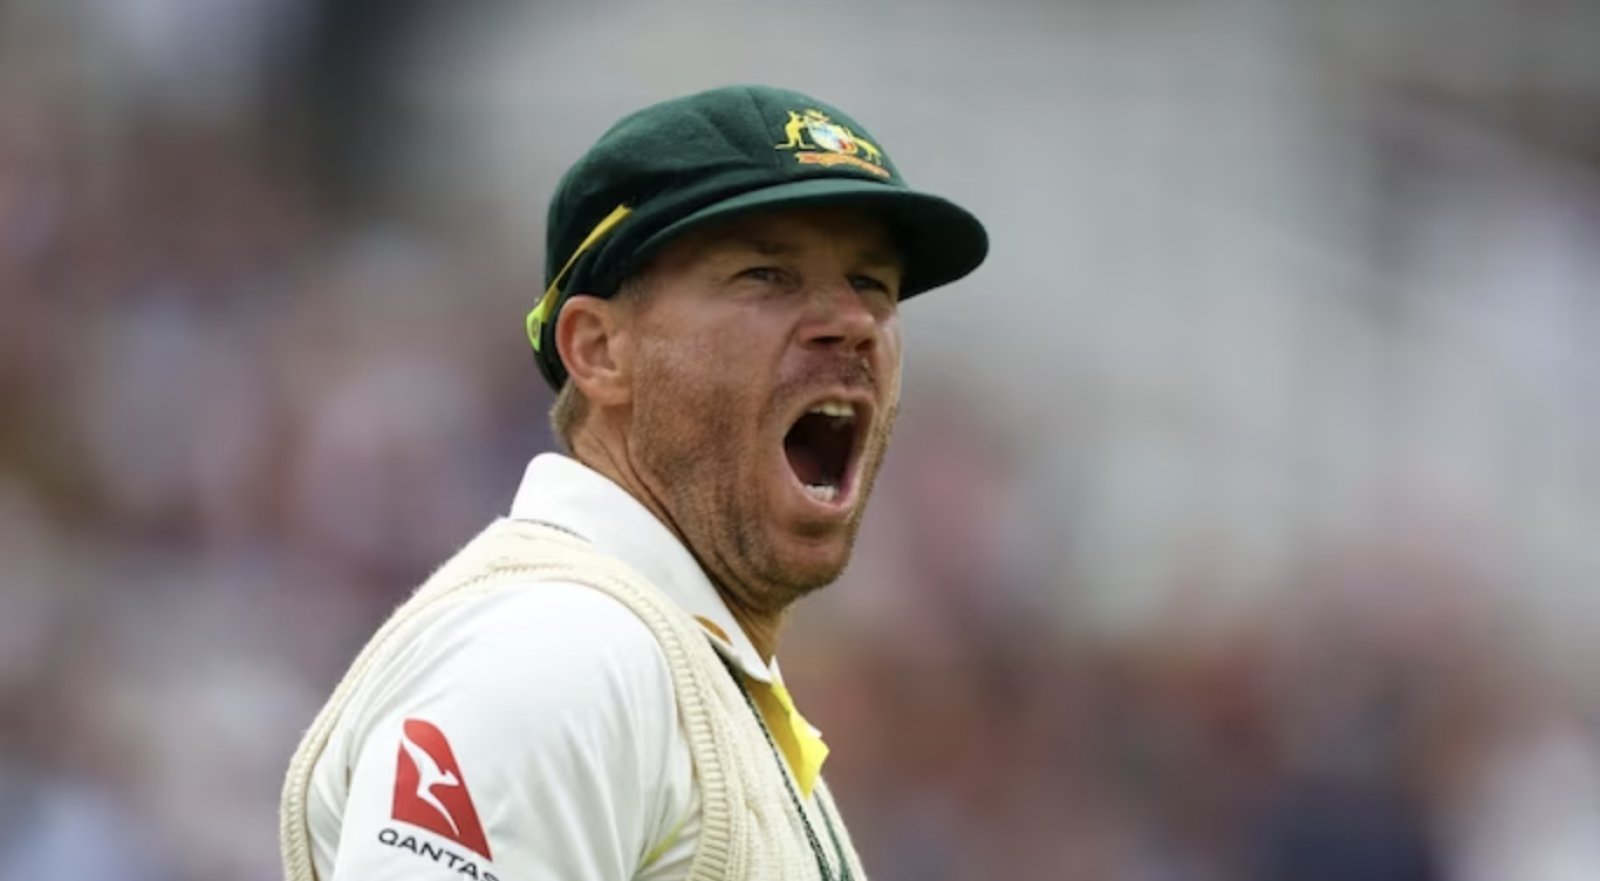 David Warner's precious thing was stolen before the farewell test; Made appeal on social media to return it